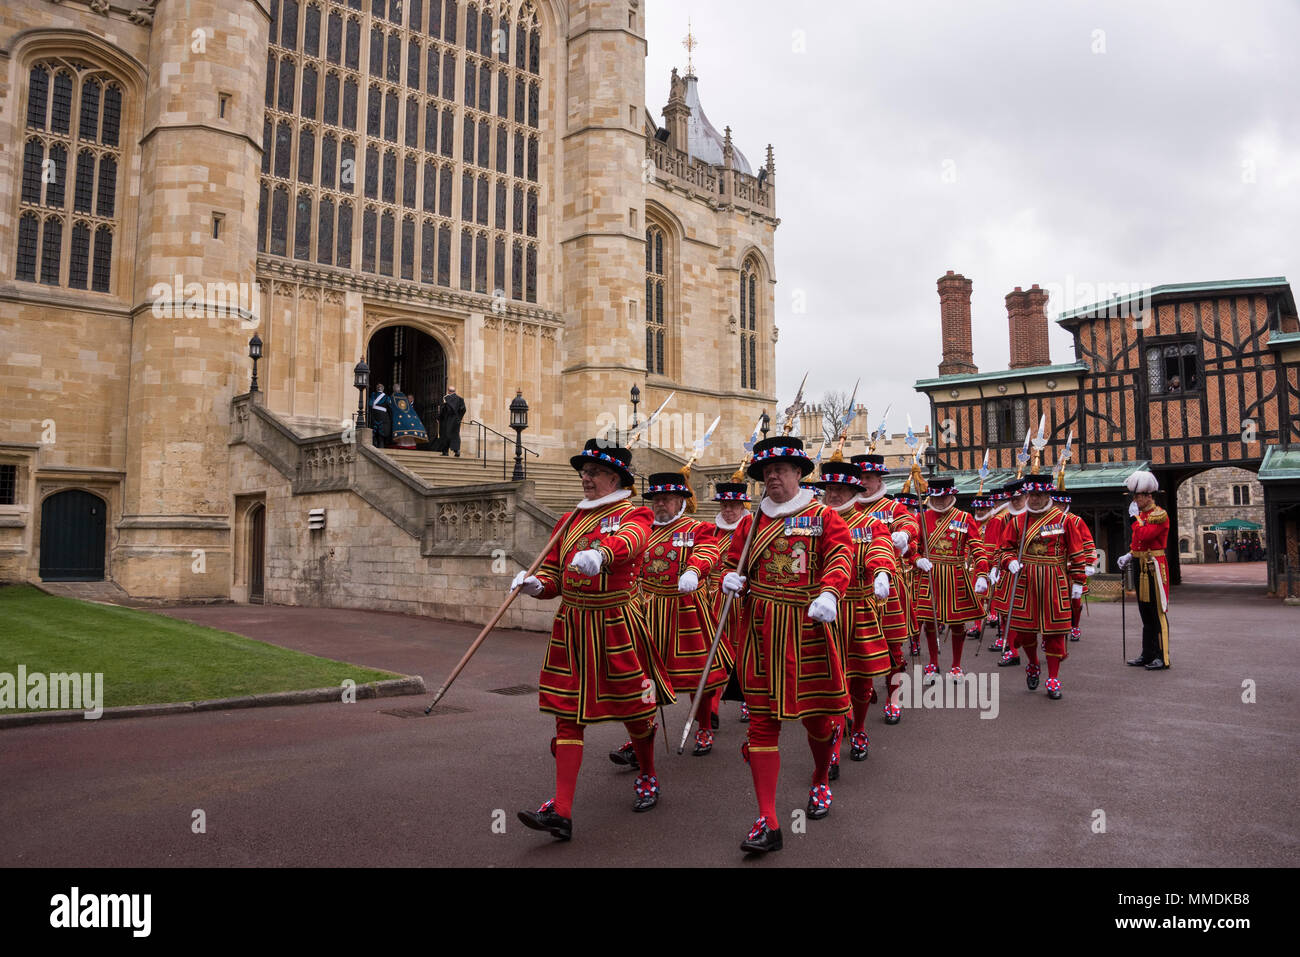 The Yeomen of the Guard march away from St George's Chapel Windsor after the distribution of the Maundy Money by HM the Queen, 29th March 2018 Stock Photo